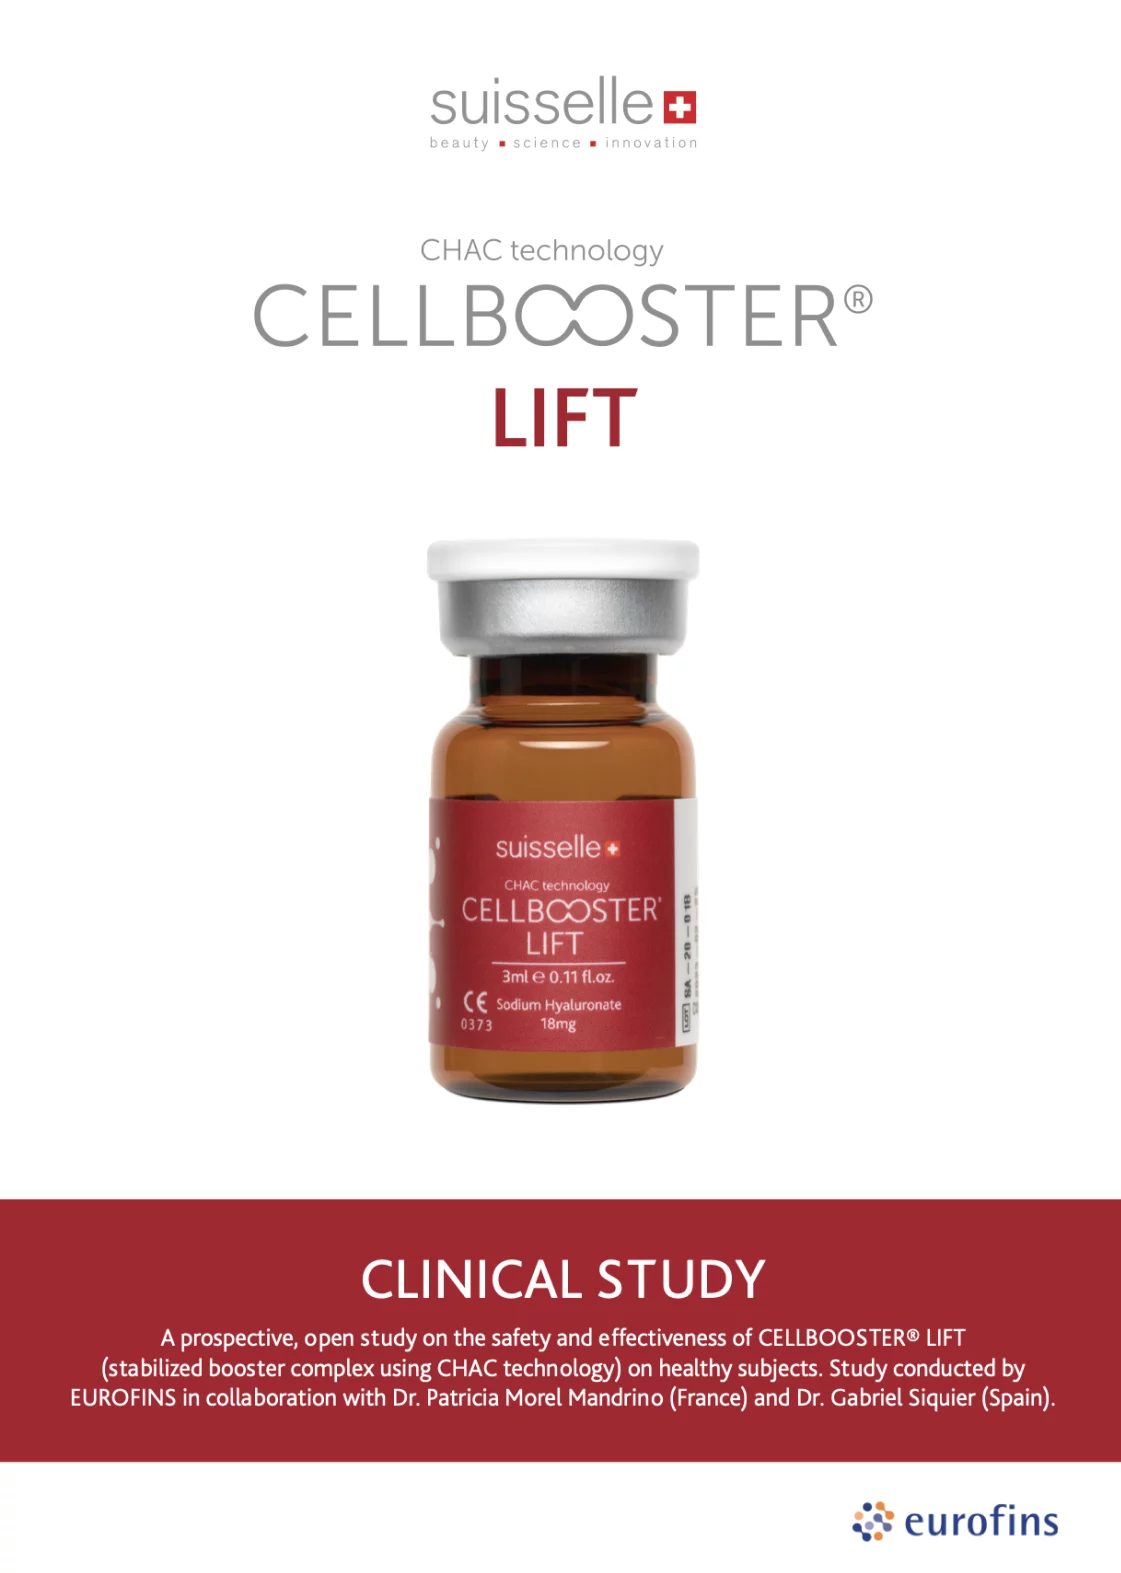 CELLBOOSTER® LIFT: A prospective, open study on the safety and effectiveness of CELLBOOSTER® LIFT (stabilized booster complex using CHAC technology) on healthy subjects. Study by EUROFINS in collaboration with Dr. Patricia Morel Mandrino and Dr. Gabriel Siquier.